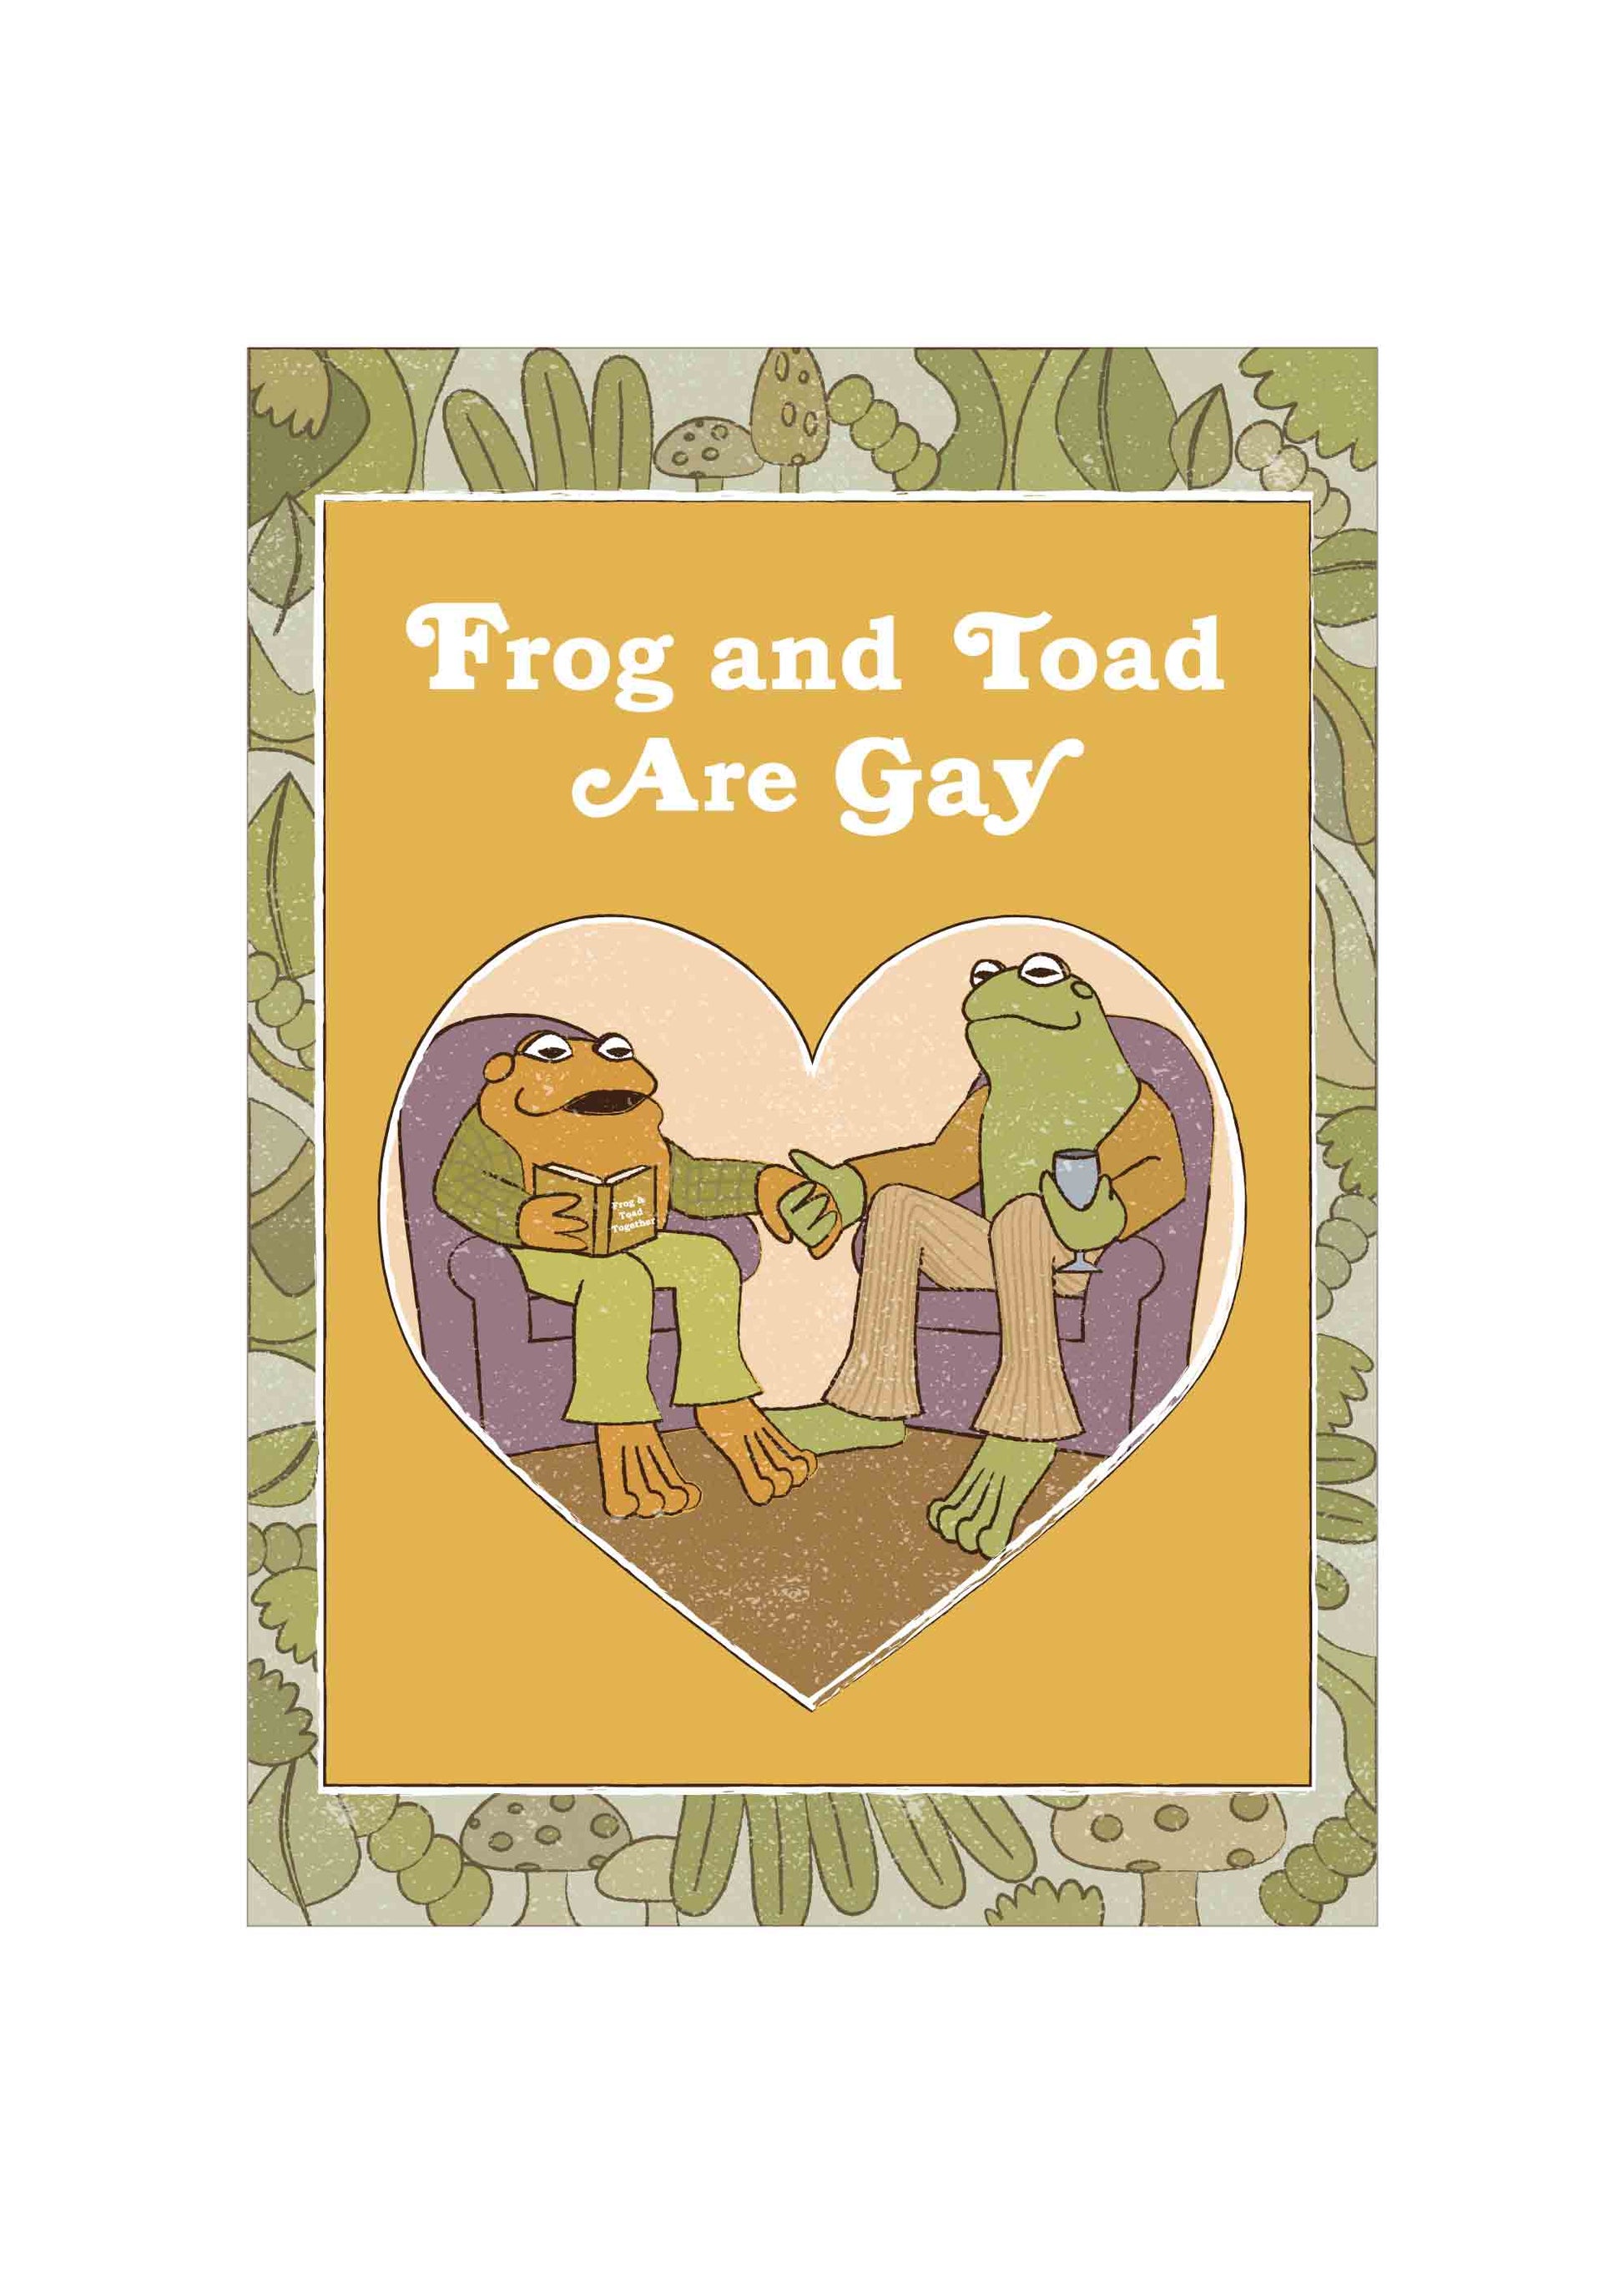 frog and toad are gay book cover design with them holding hands and reading